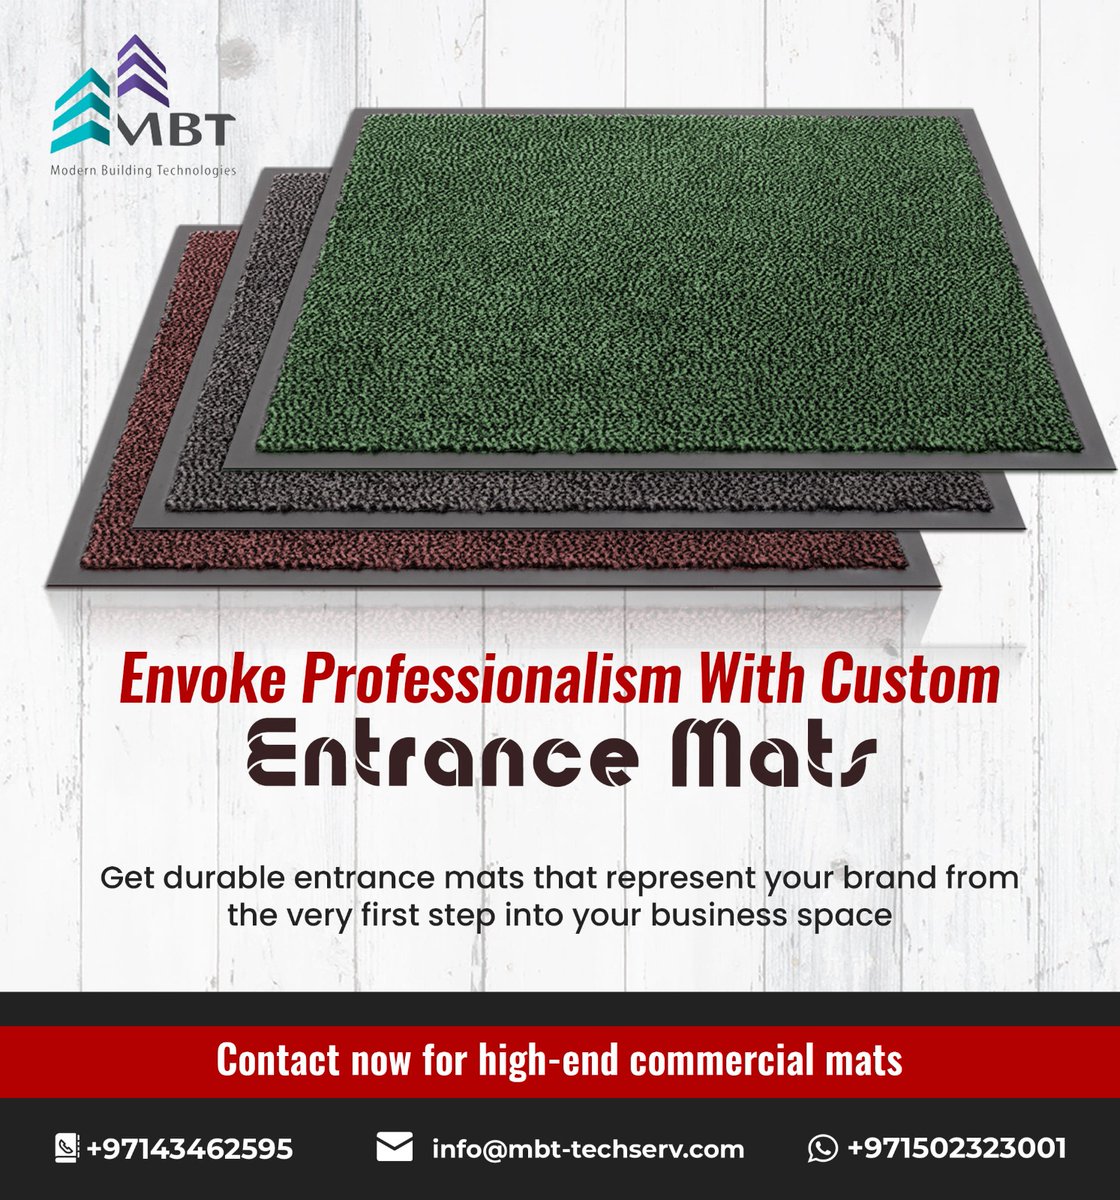 Step into safety and cleanliness with our premium entrance mats!

Experience the difference and request a personalized project quote: 
📱 WhatsApp: +9710502323001
📞 Phone: +97143462595 
📧 Email: info@mbt-techserv.com

#mbt #entrancemats #safetyfirst #buildingmaterialsupplier